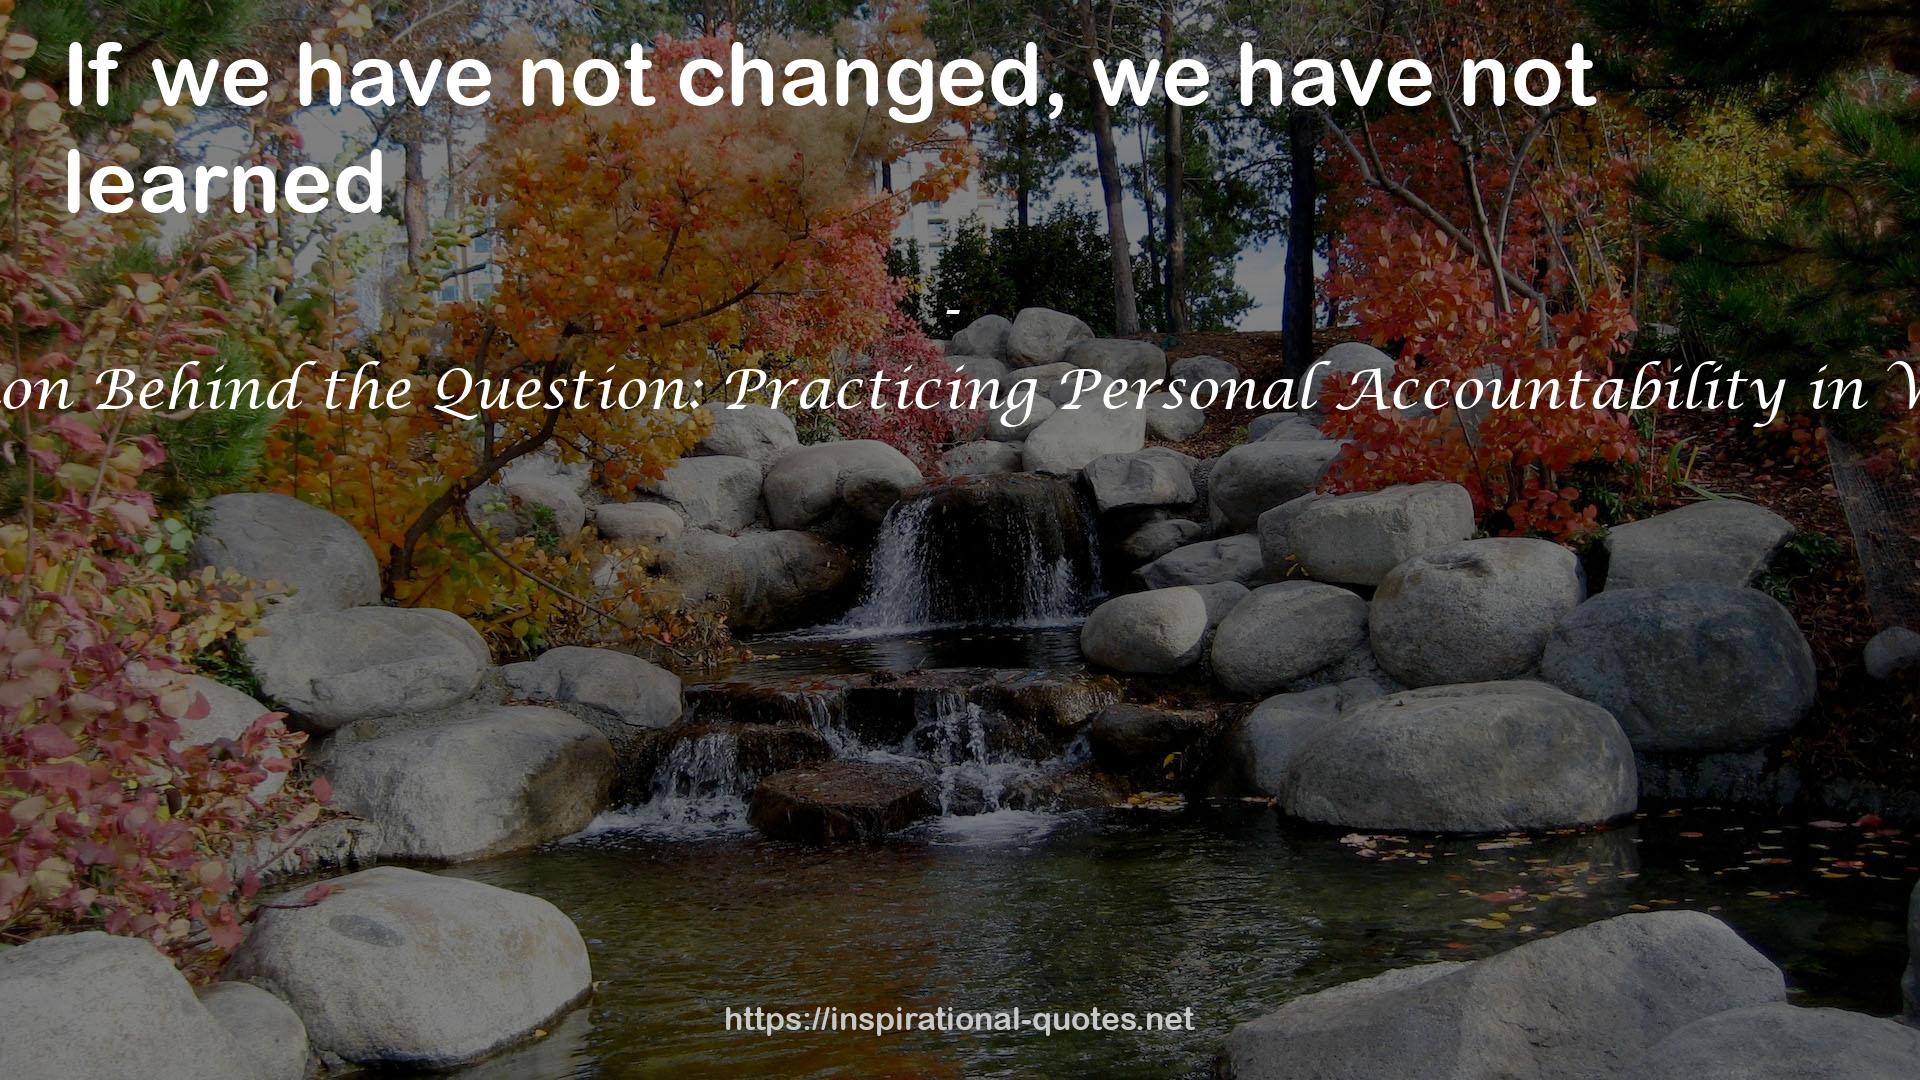 QBQ! The Question Behind the Question: Practicing Personal Accountability in Work and in Life QUOTES